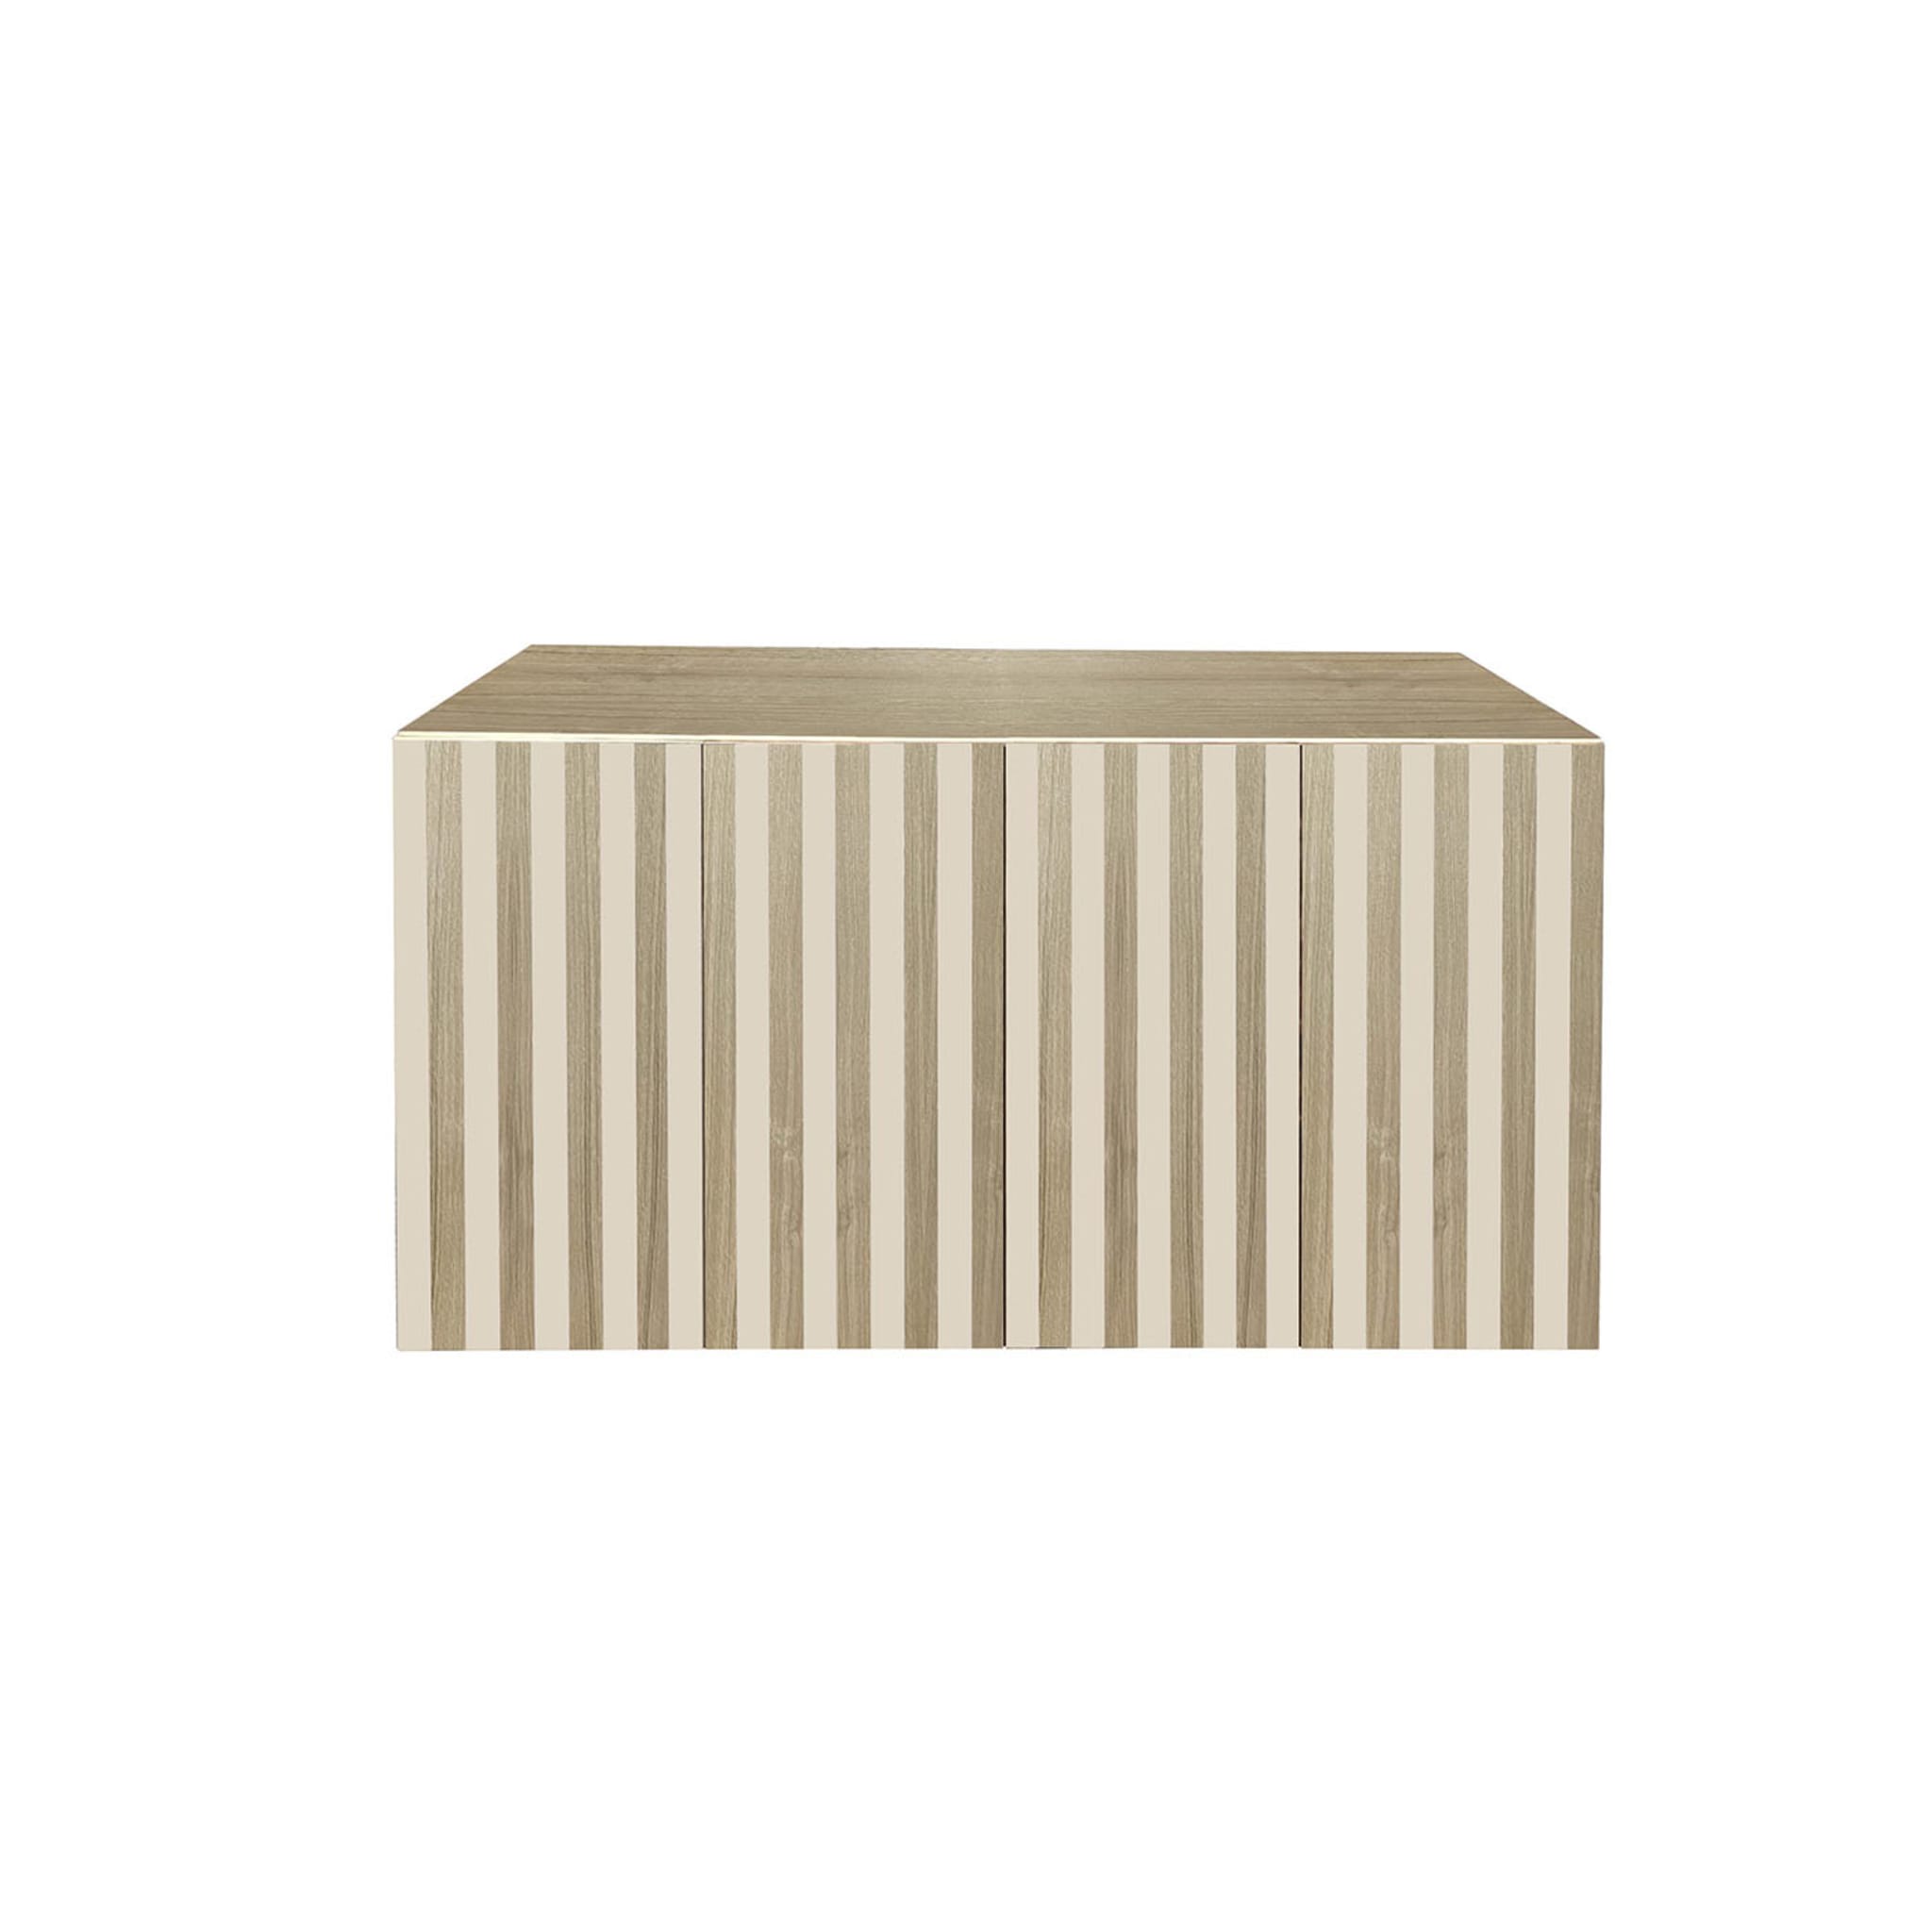 Md4 4-Door Striped Sideboard by Meccani Studio - Alternative view 1